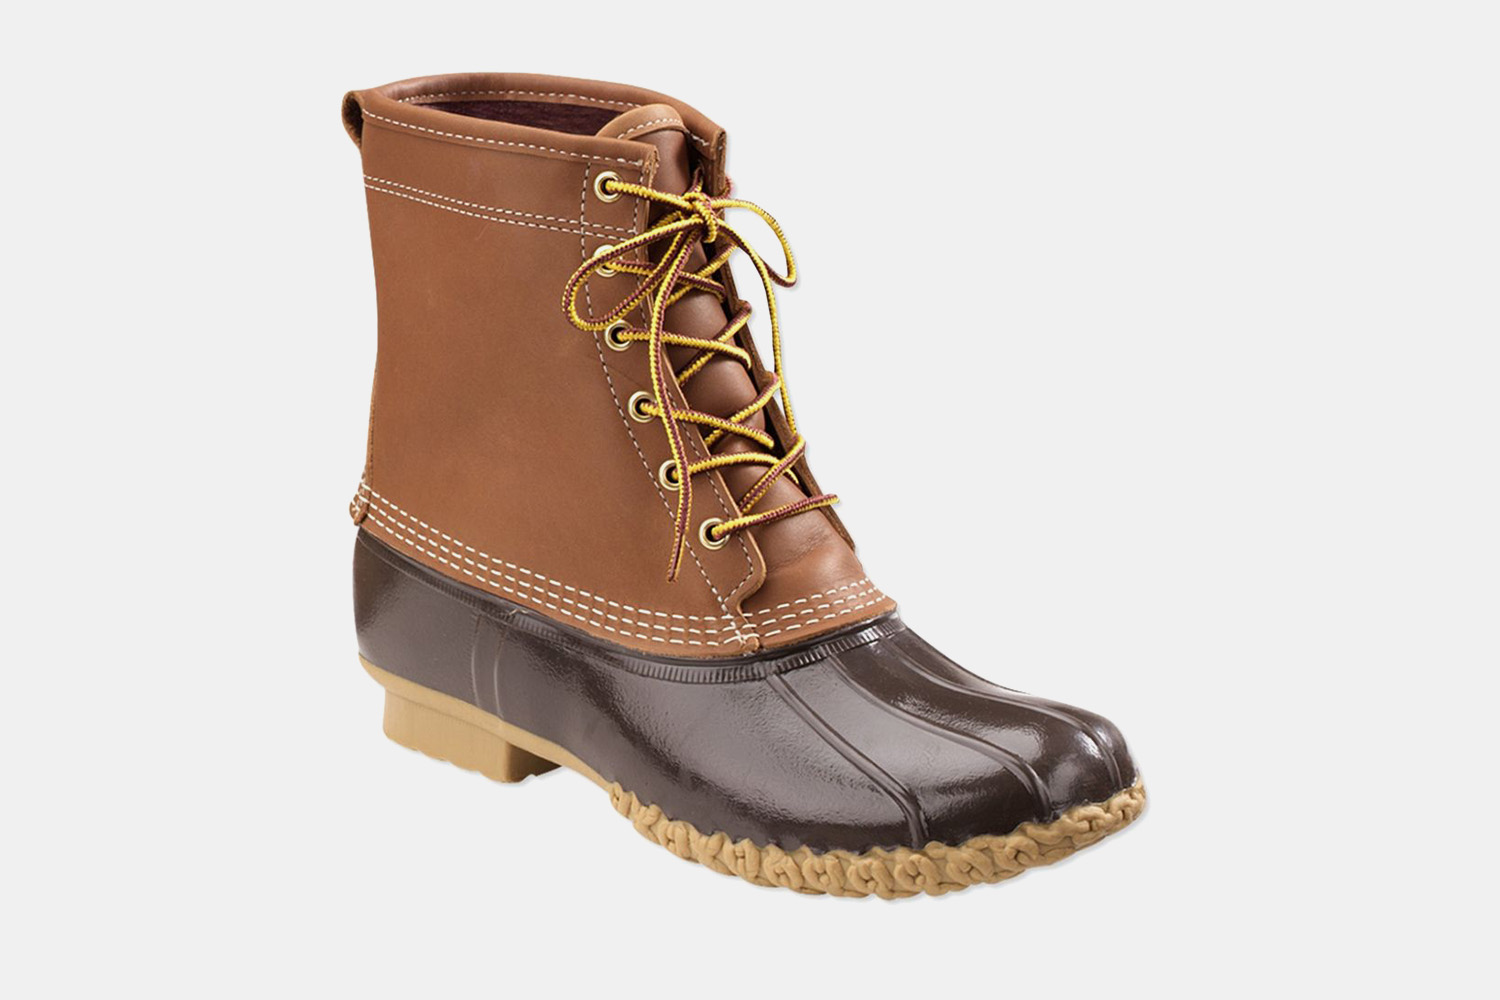 Deal: The Iconic L.L.Bean Boots Are 